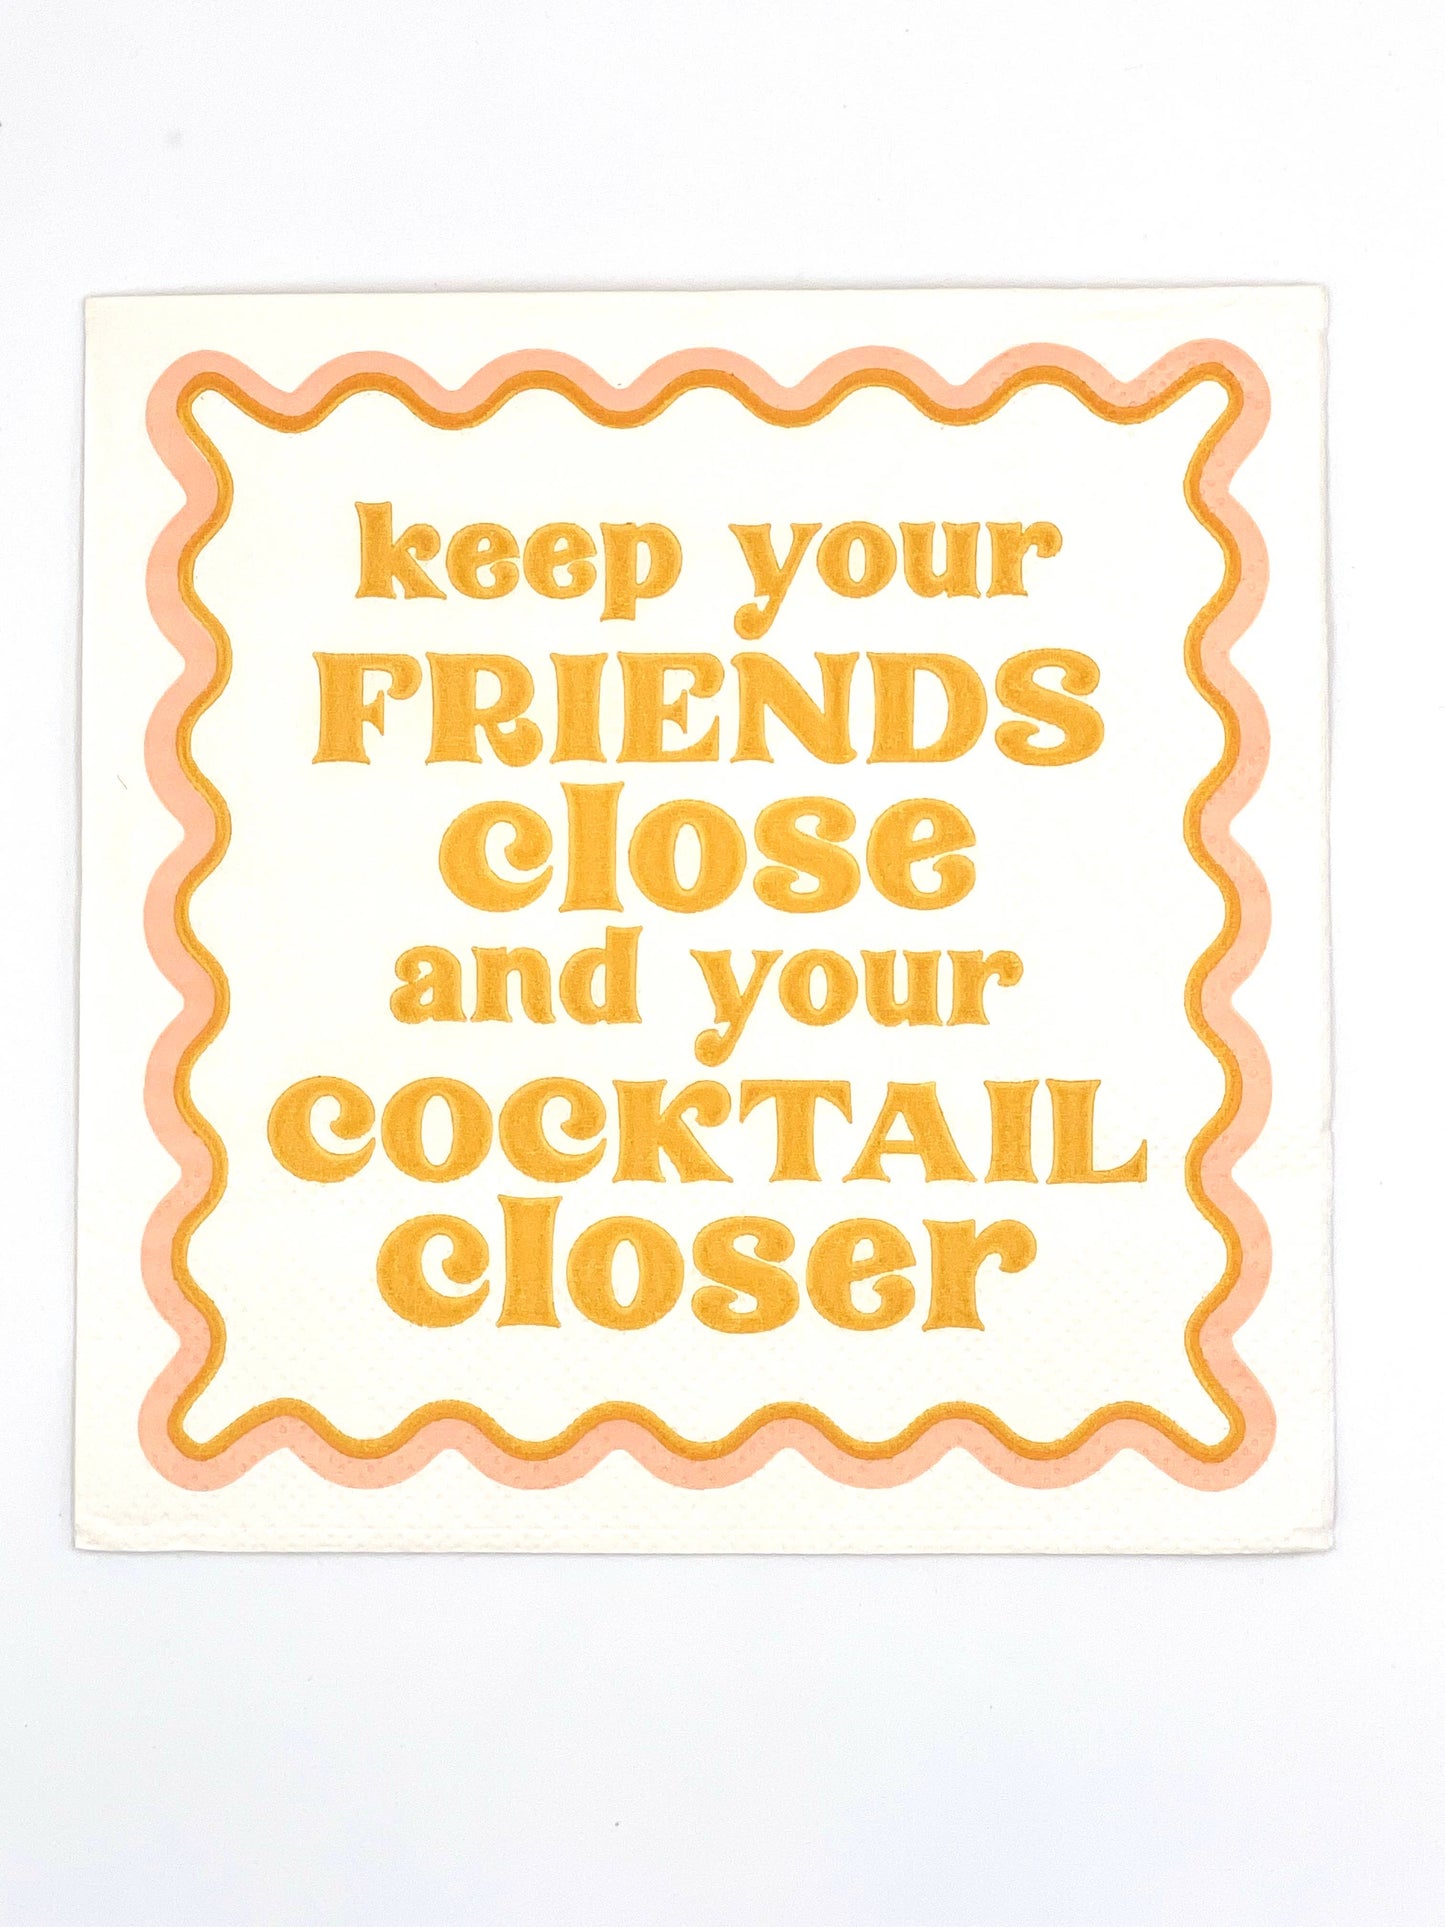  Paper Beverage/Appetizer/Cocktail Napkins/Wine Humor/Disposable Napkins for Parties and Entertainment/Party Supplies, Keep Your Friends Close and Your Cocktail Closer Napkins